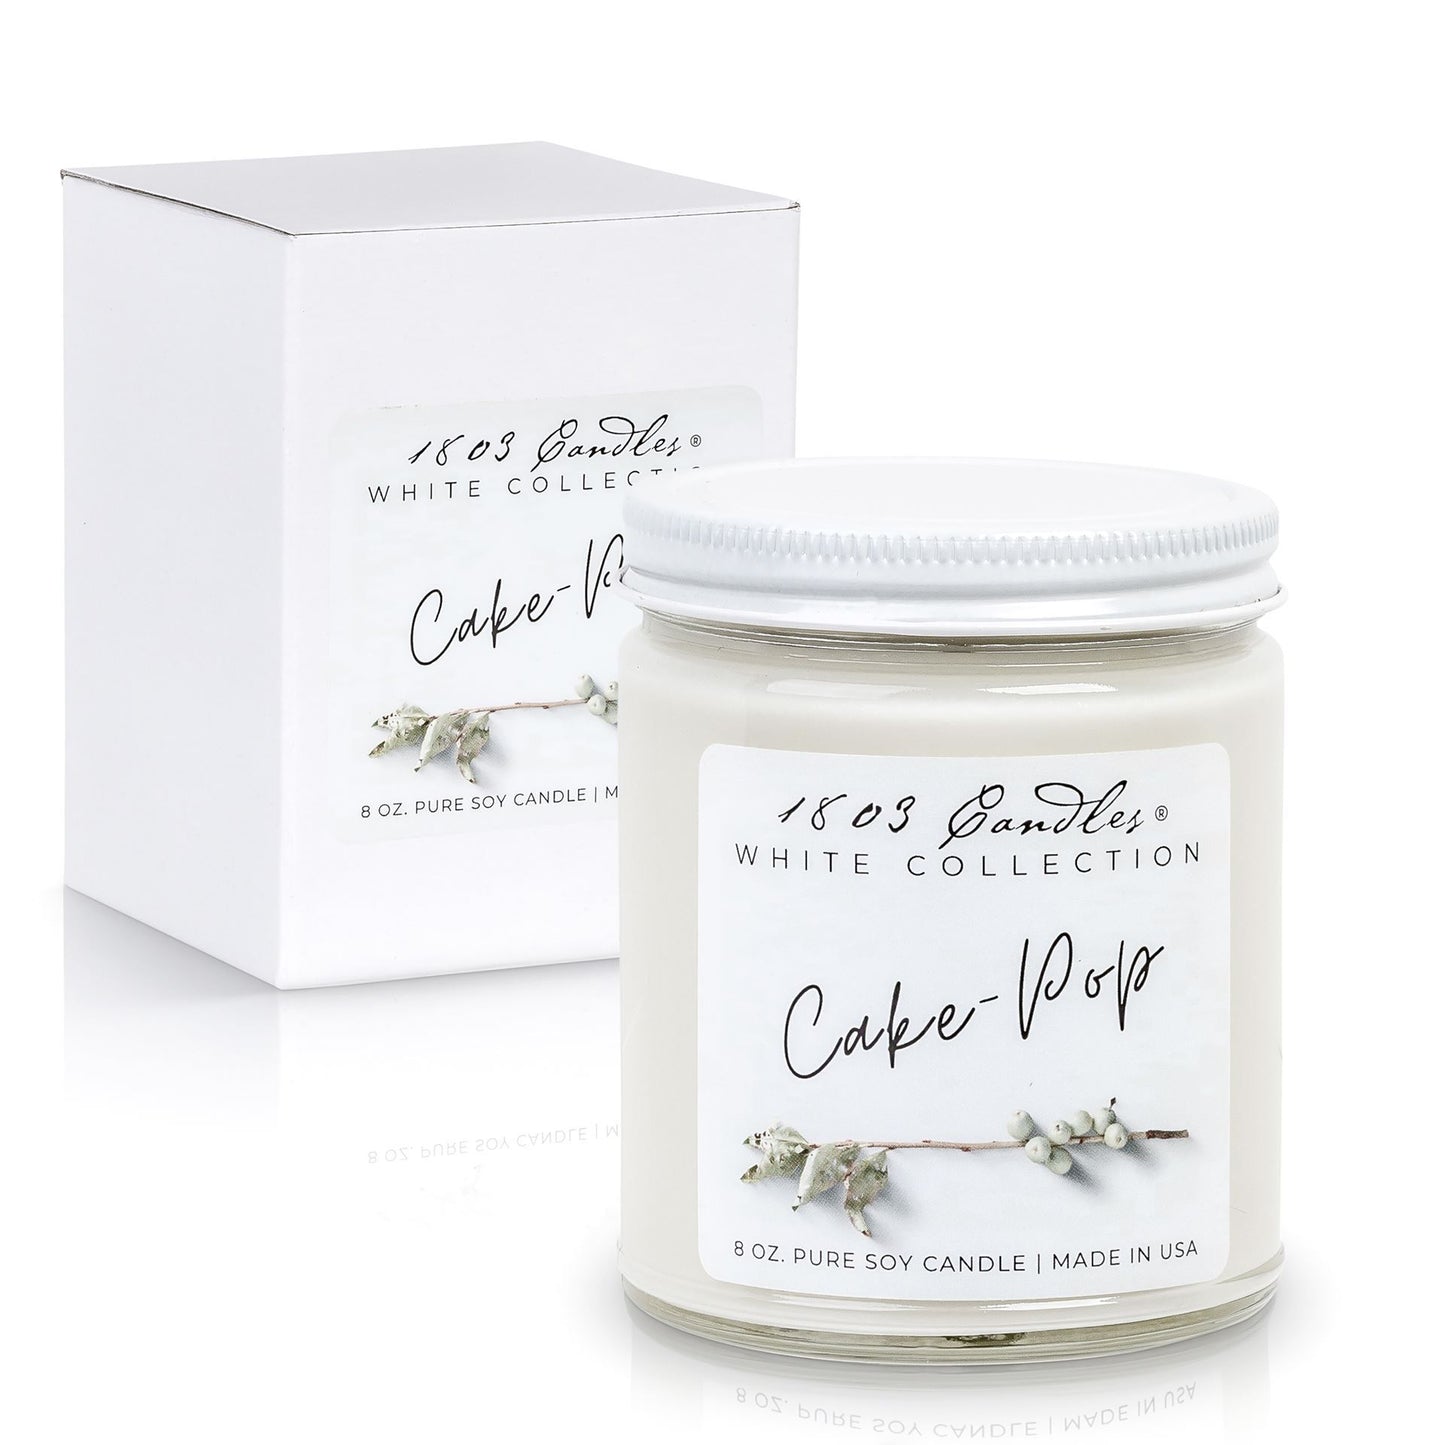 1803 White Collection Candle